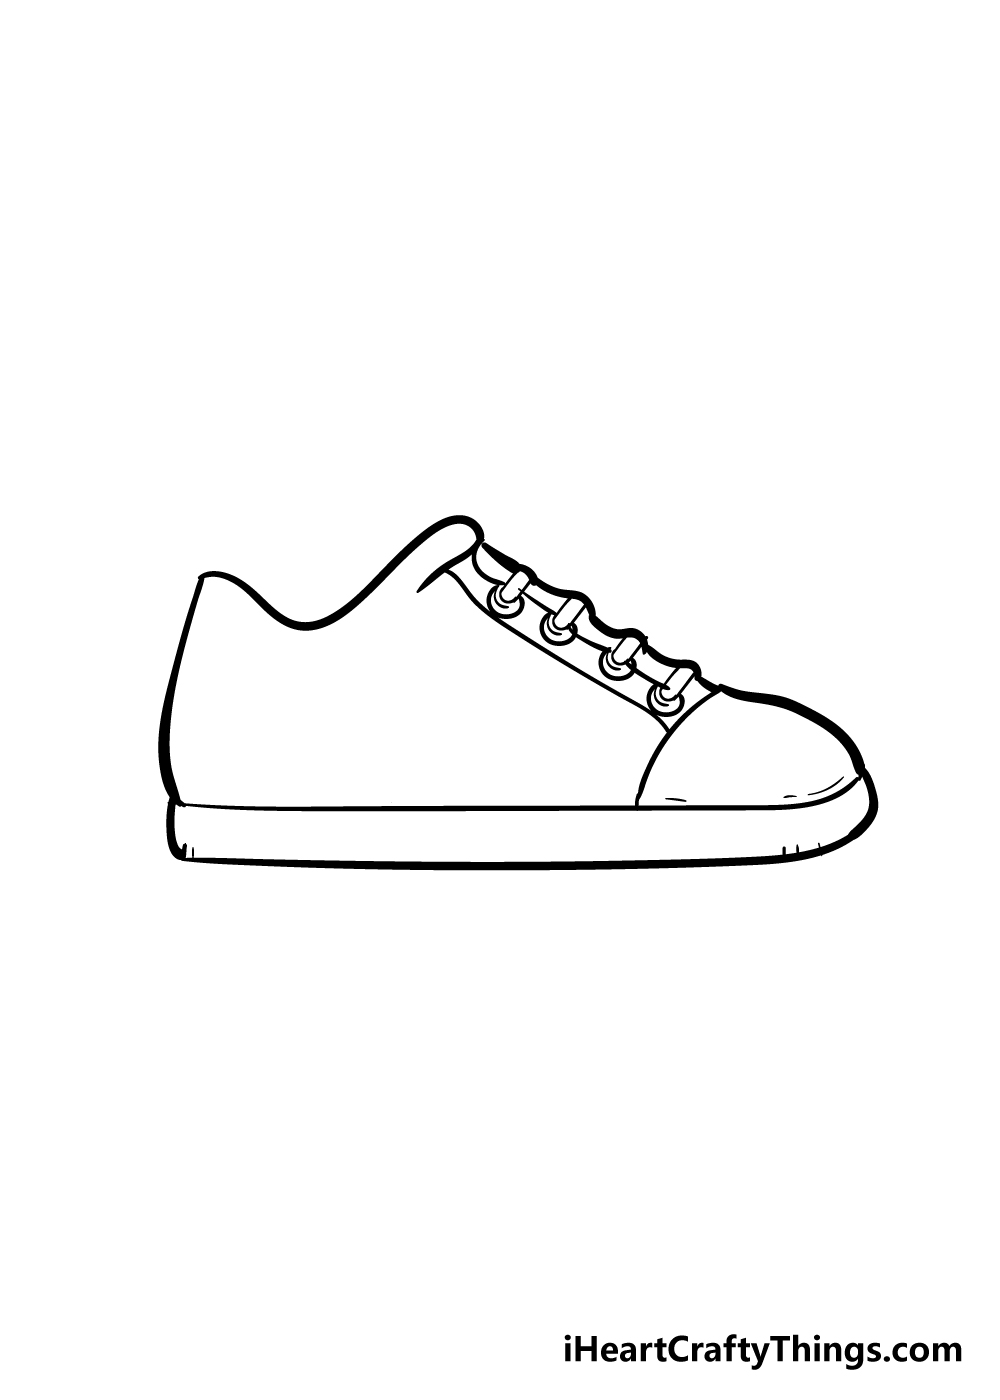 How to draw girl shoes cute and easy - Easy drawings for kids